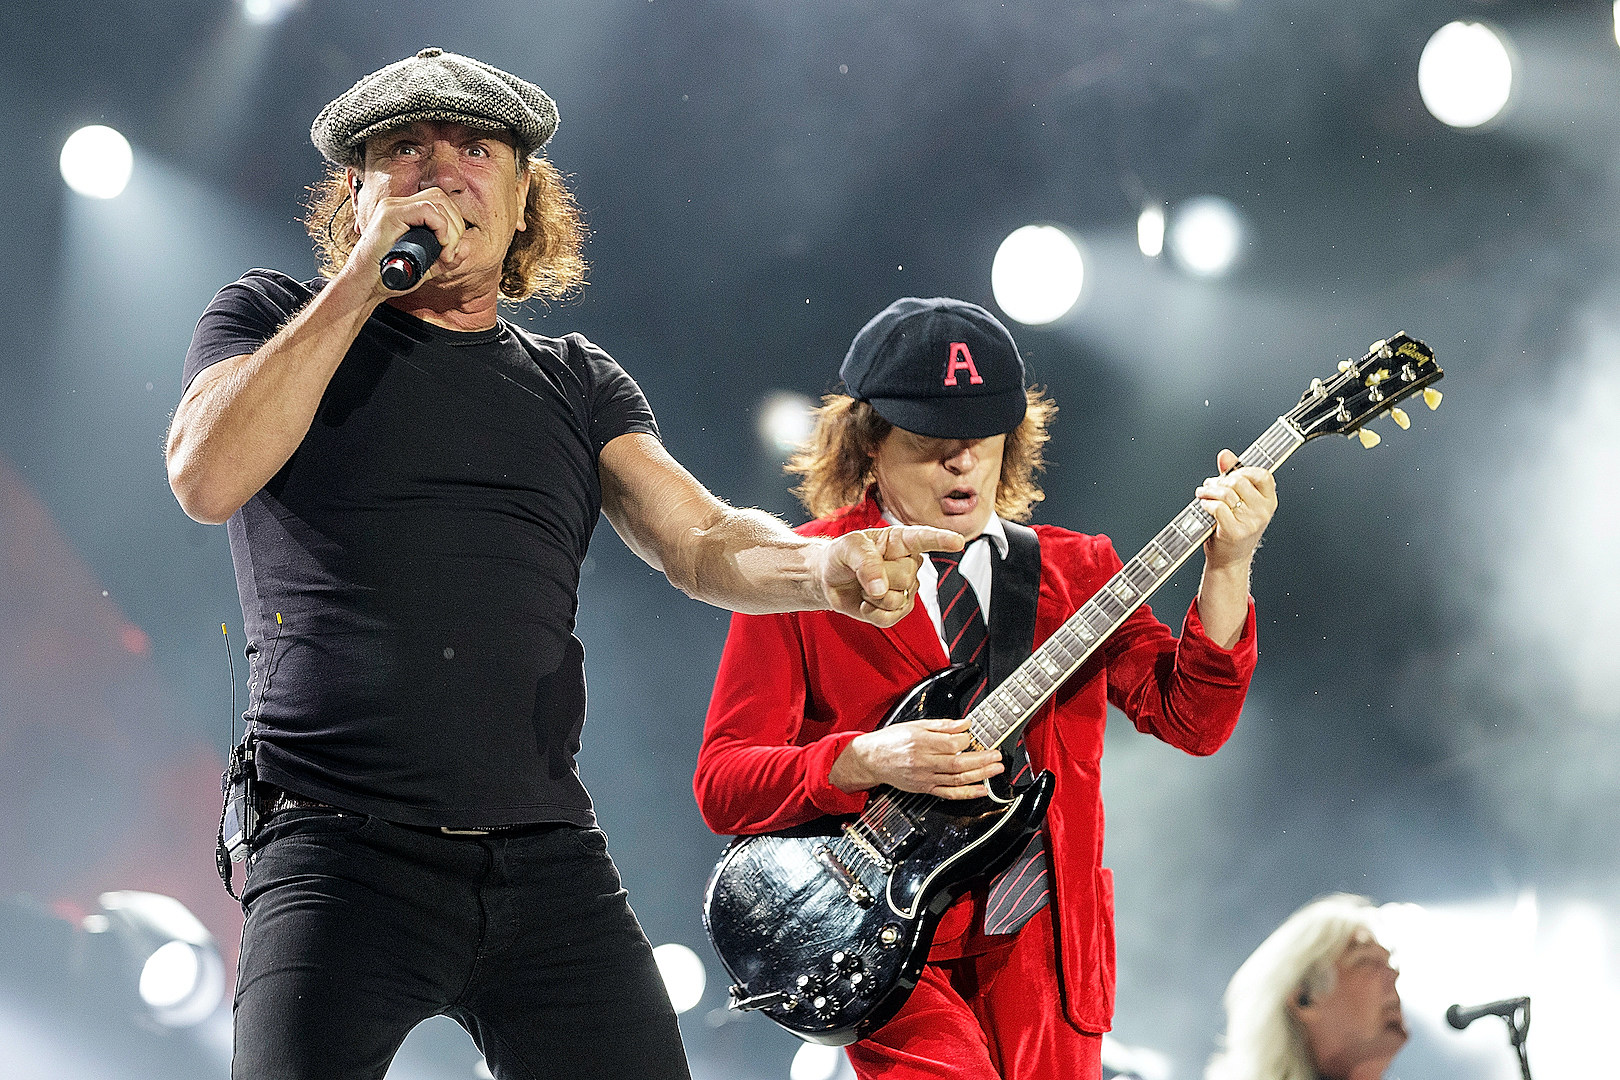 Report: AC/DC to Tour This Fall After Release of New Album